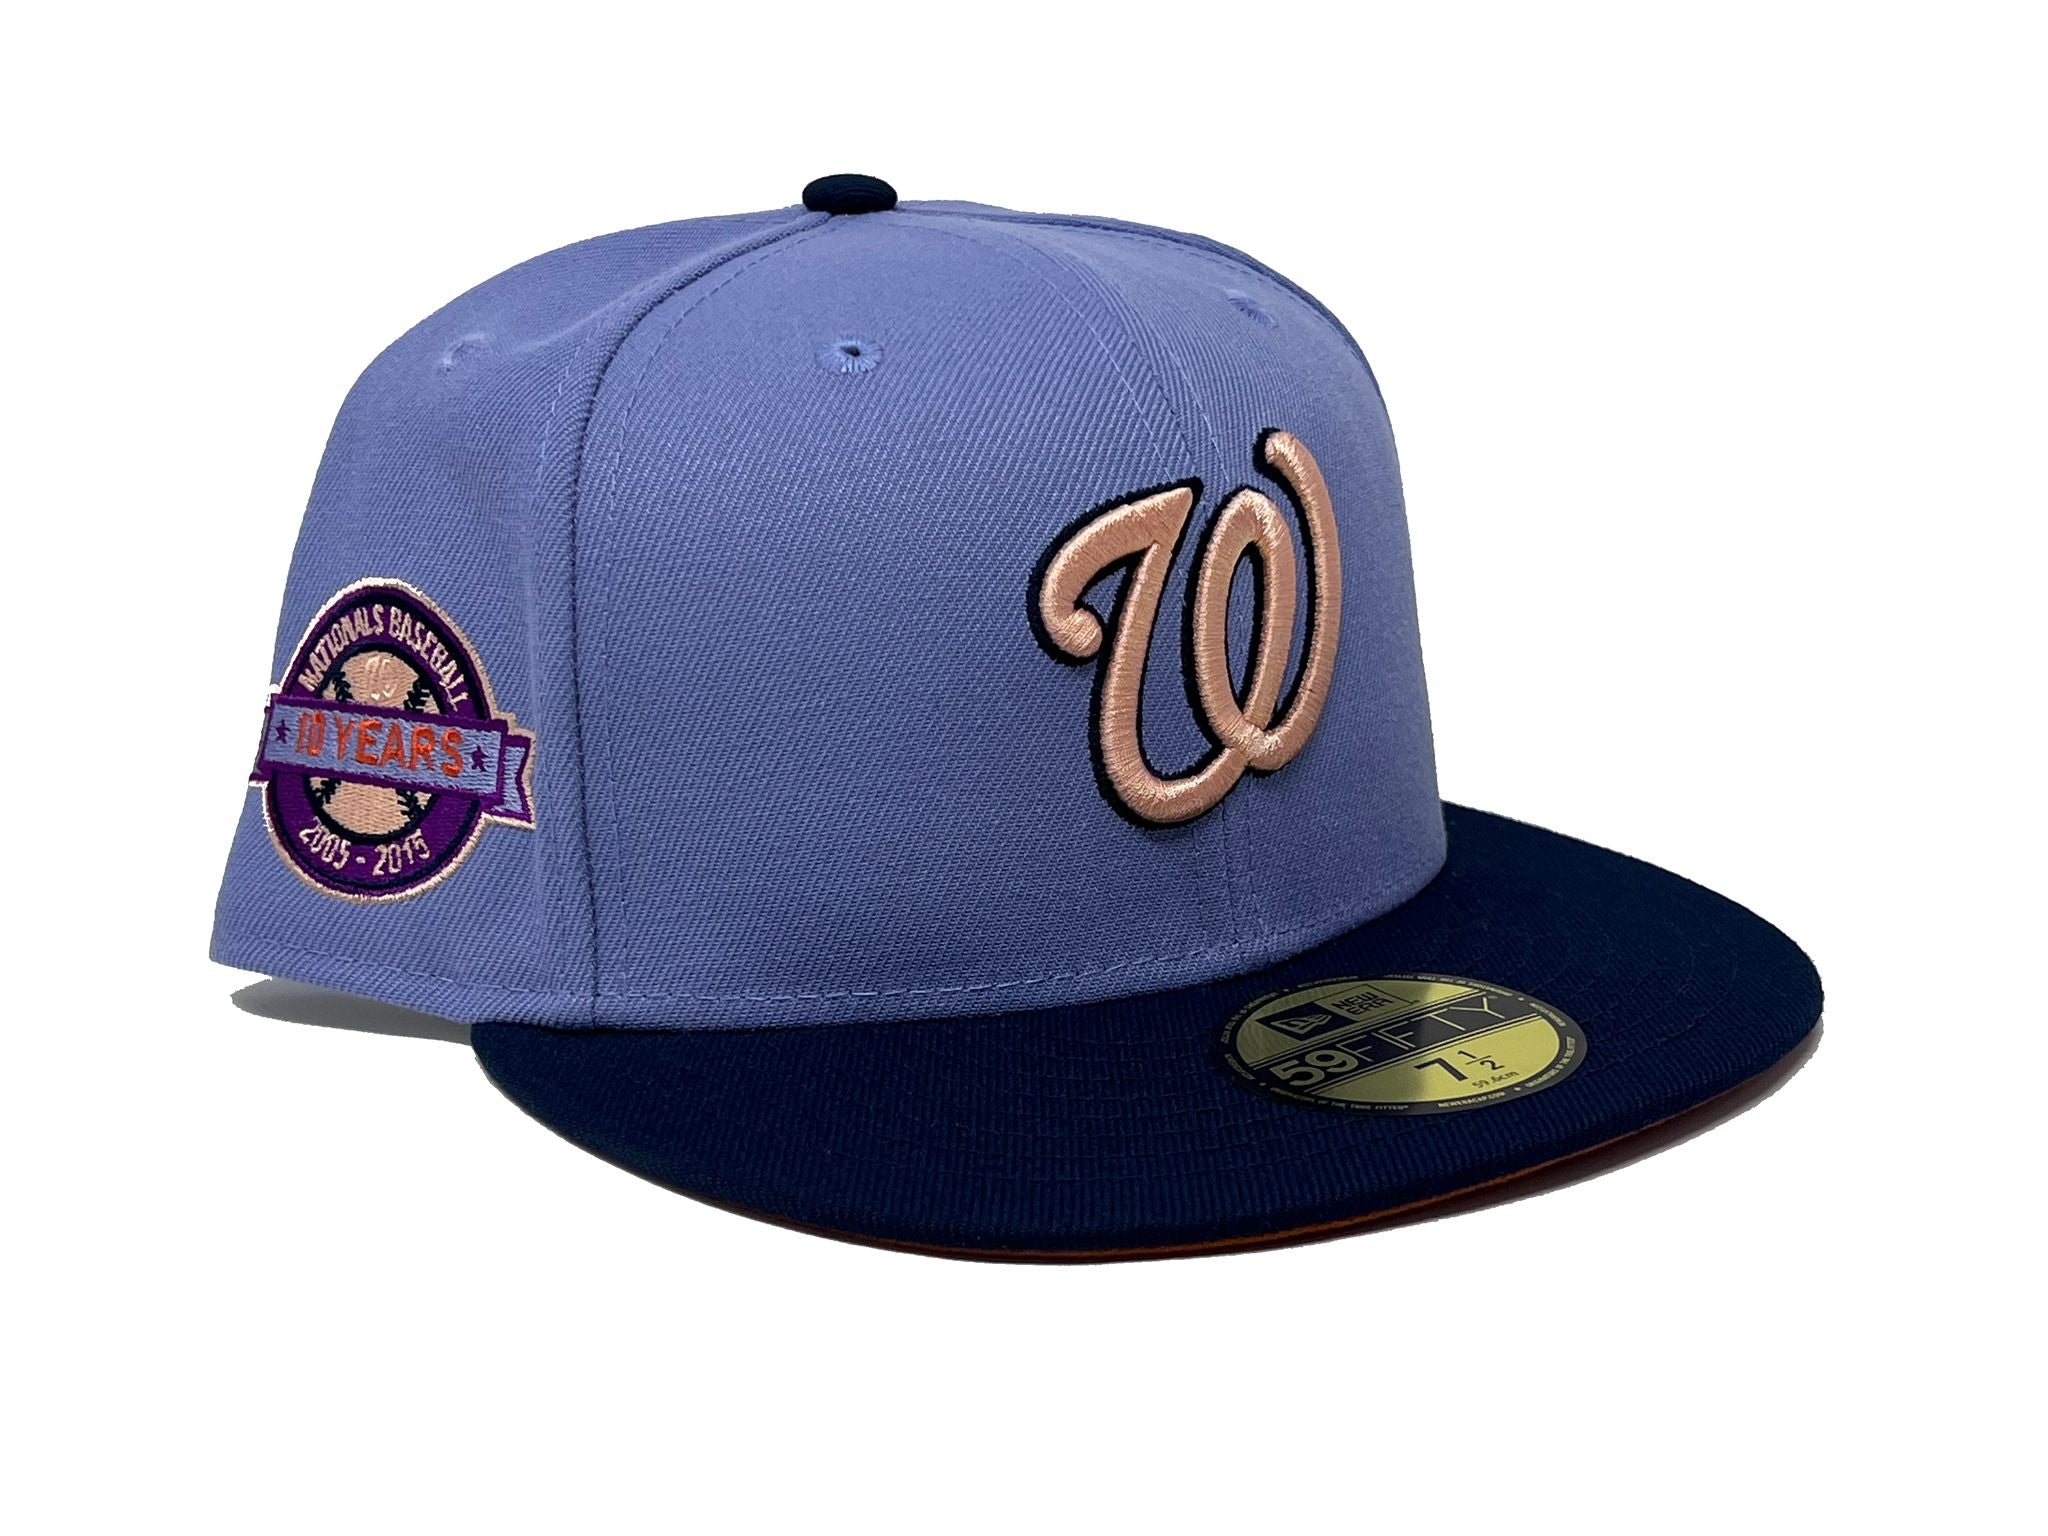 Lids Washington Nationals New Era 10th Anniversary Sky Blue Undervisor  59FIFTY Fitted Hat - Tan